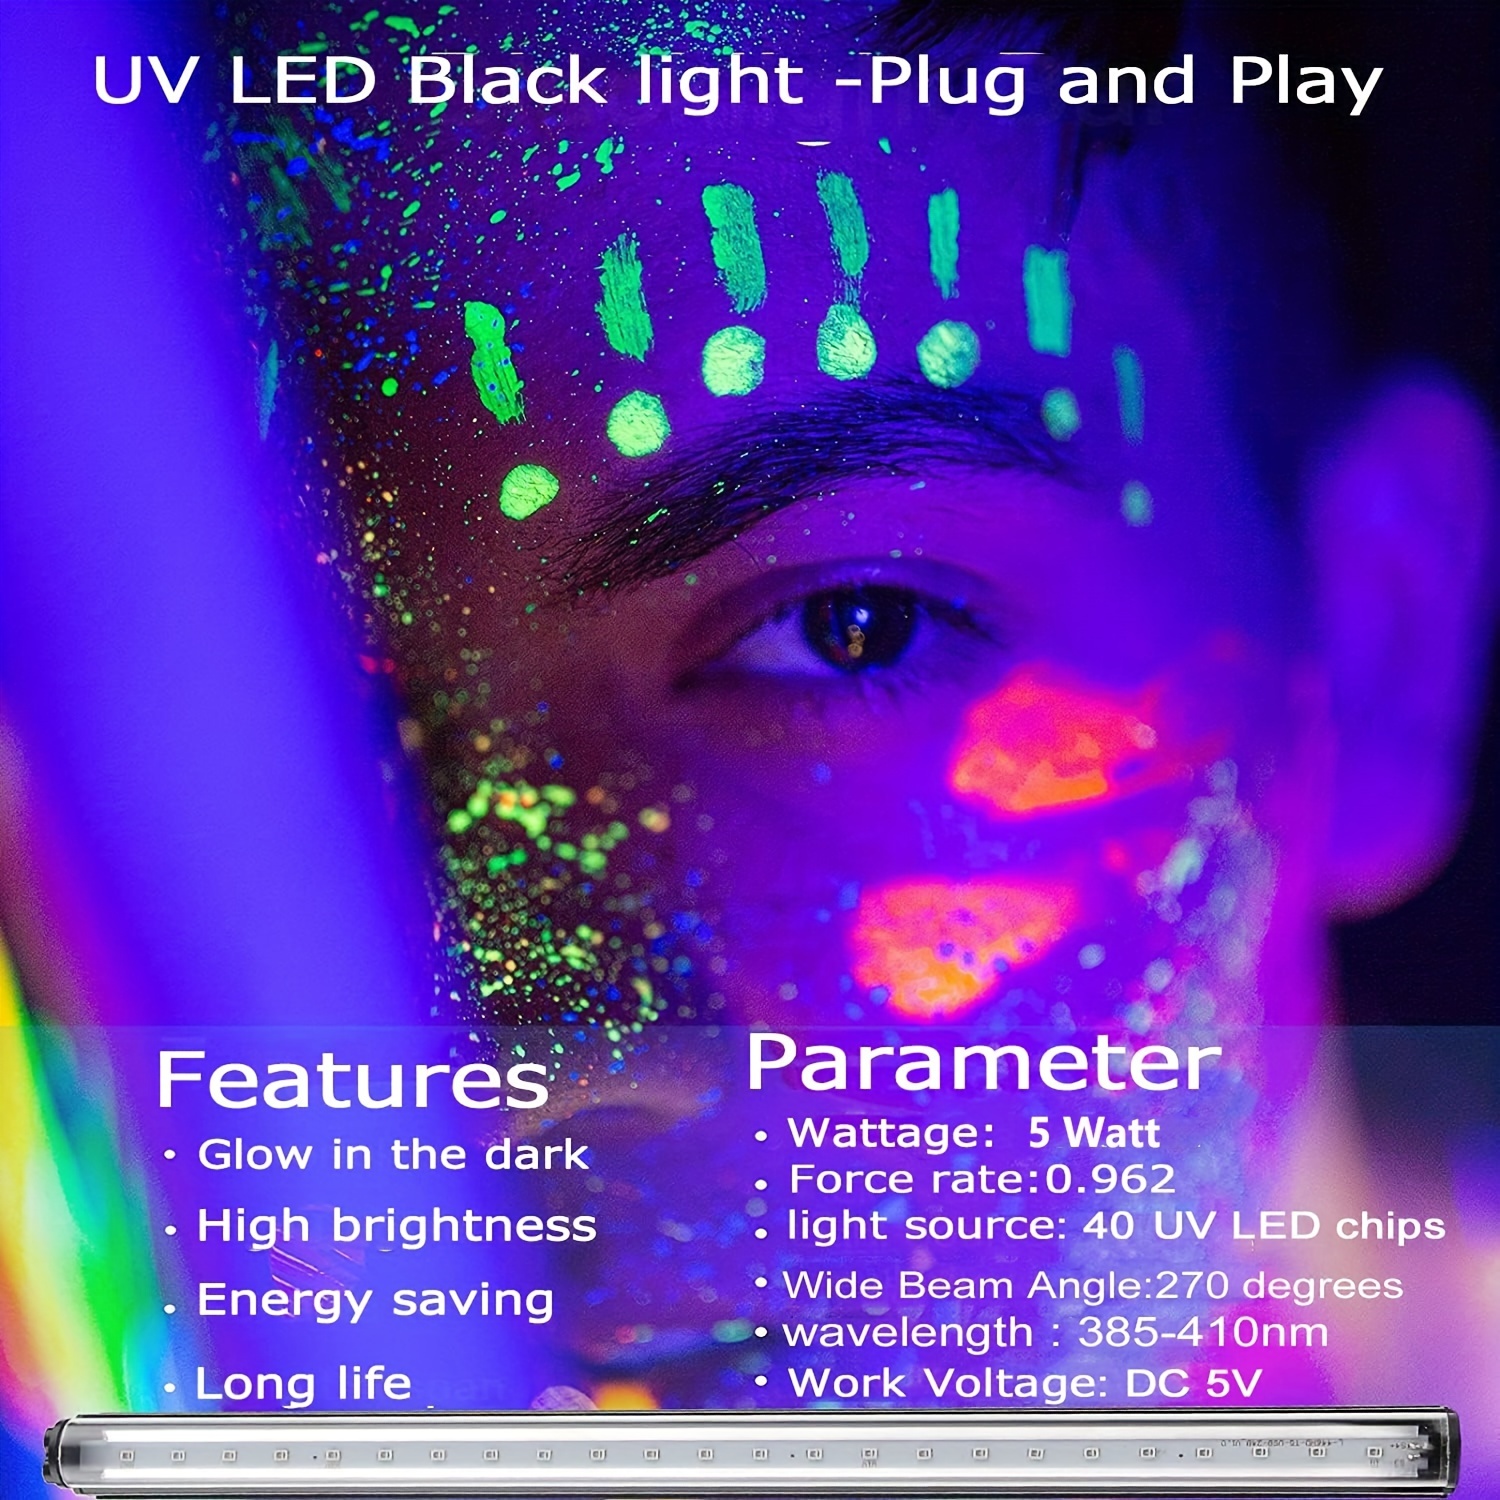 Glow in the Dark and Black Light Party Ideas  Blacklight party, Black  light party supplies, Glow in dark party